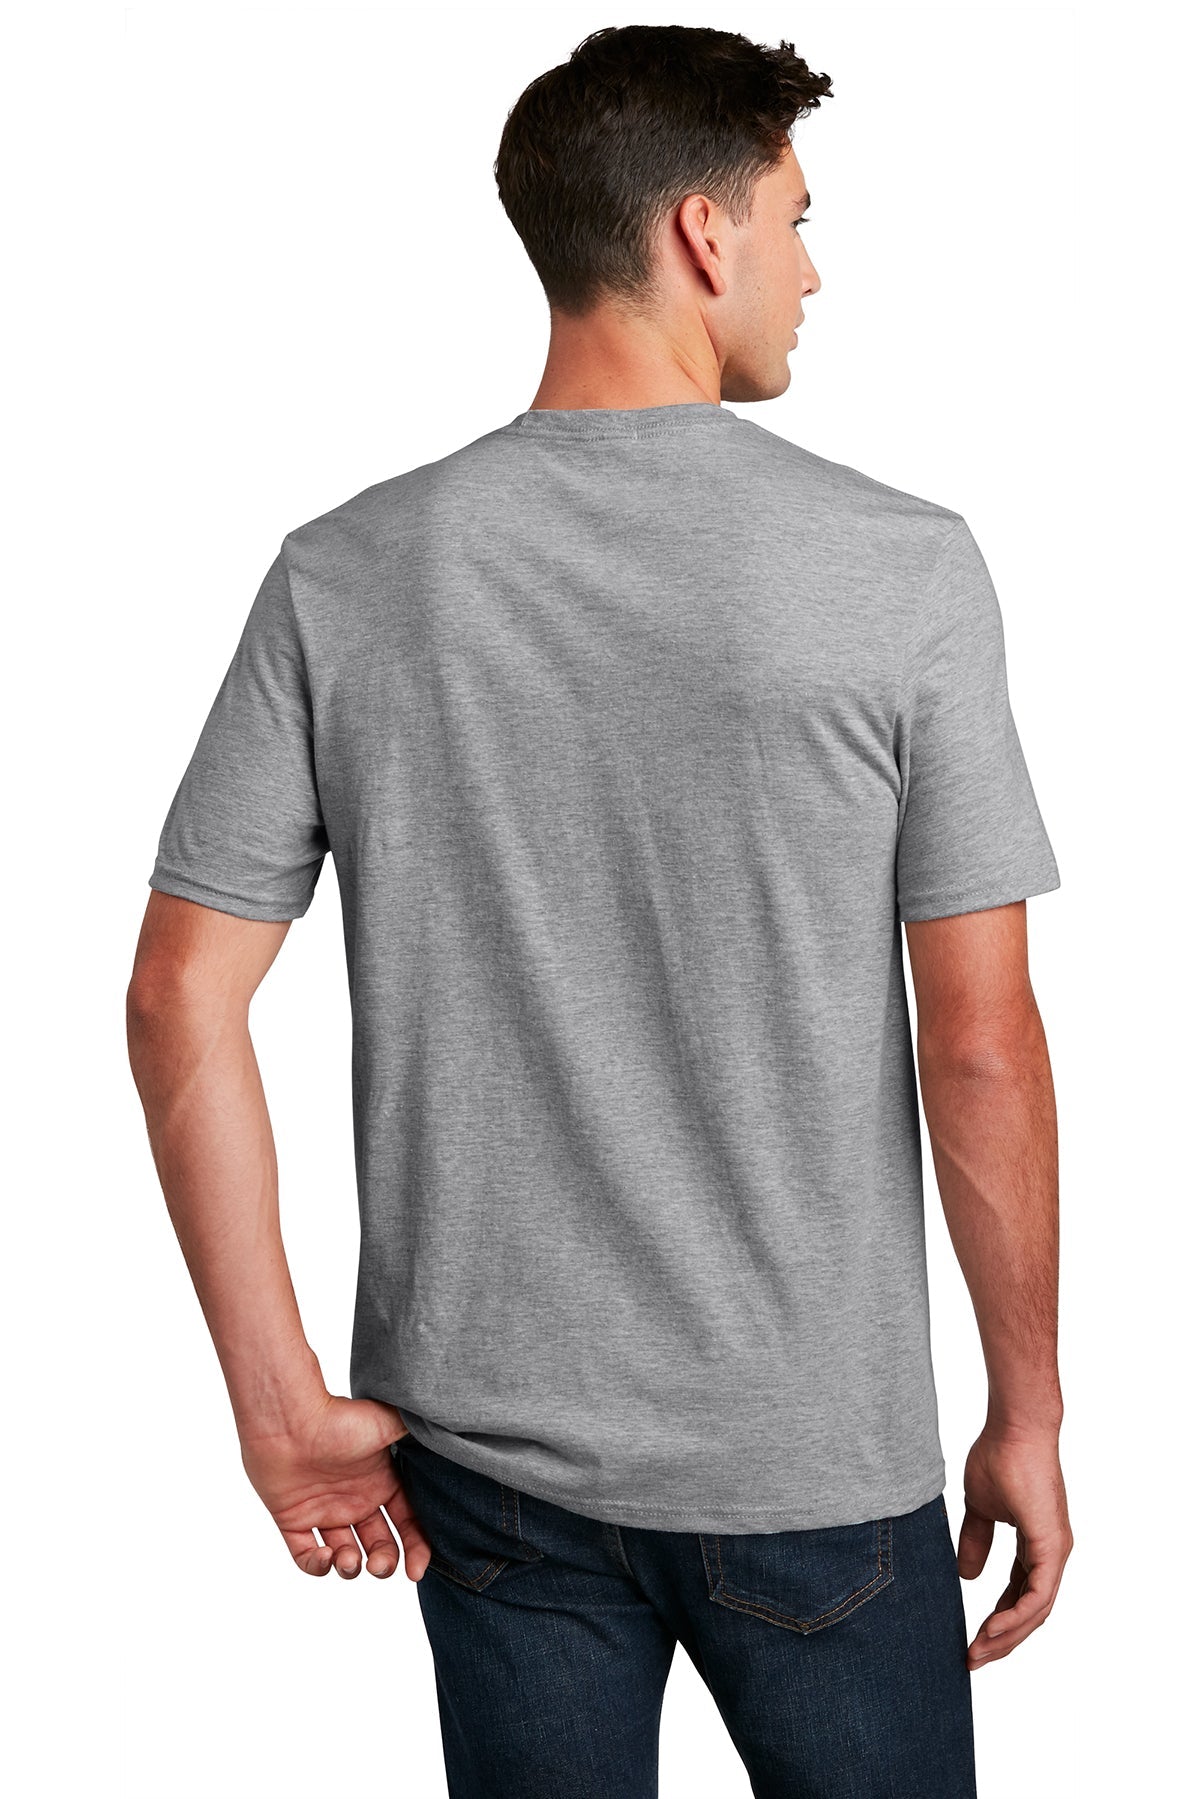 District Made Mens Perfect Blend Tee's, Light Heather Grey